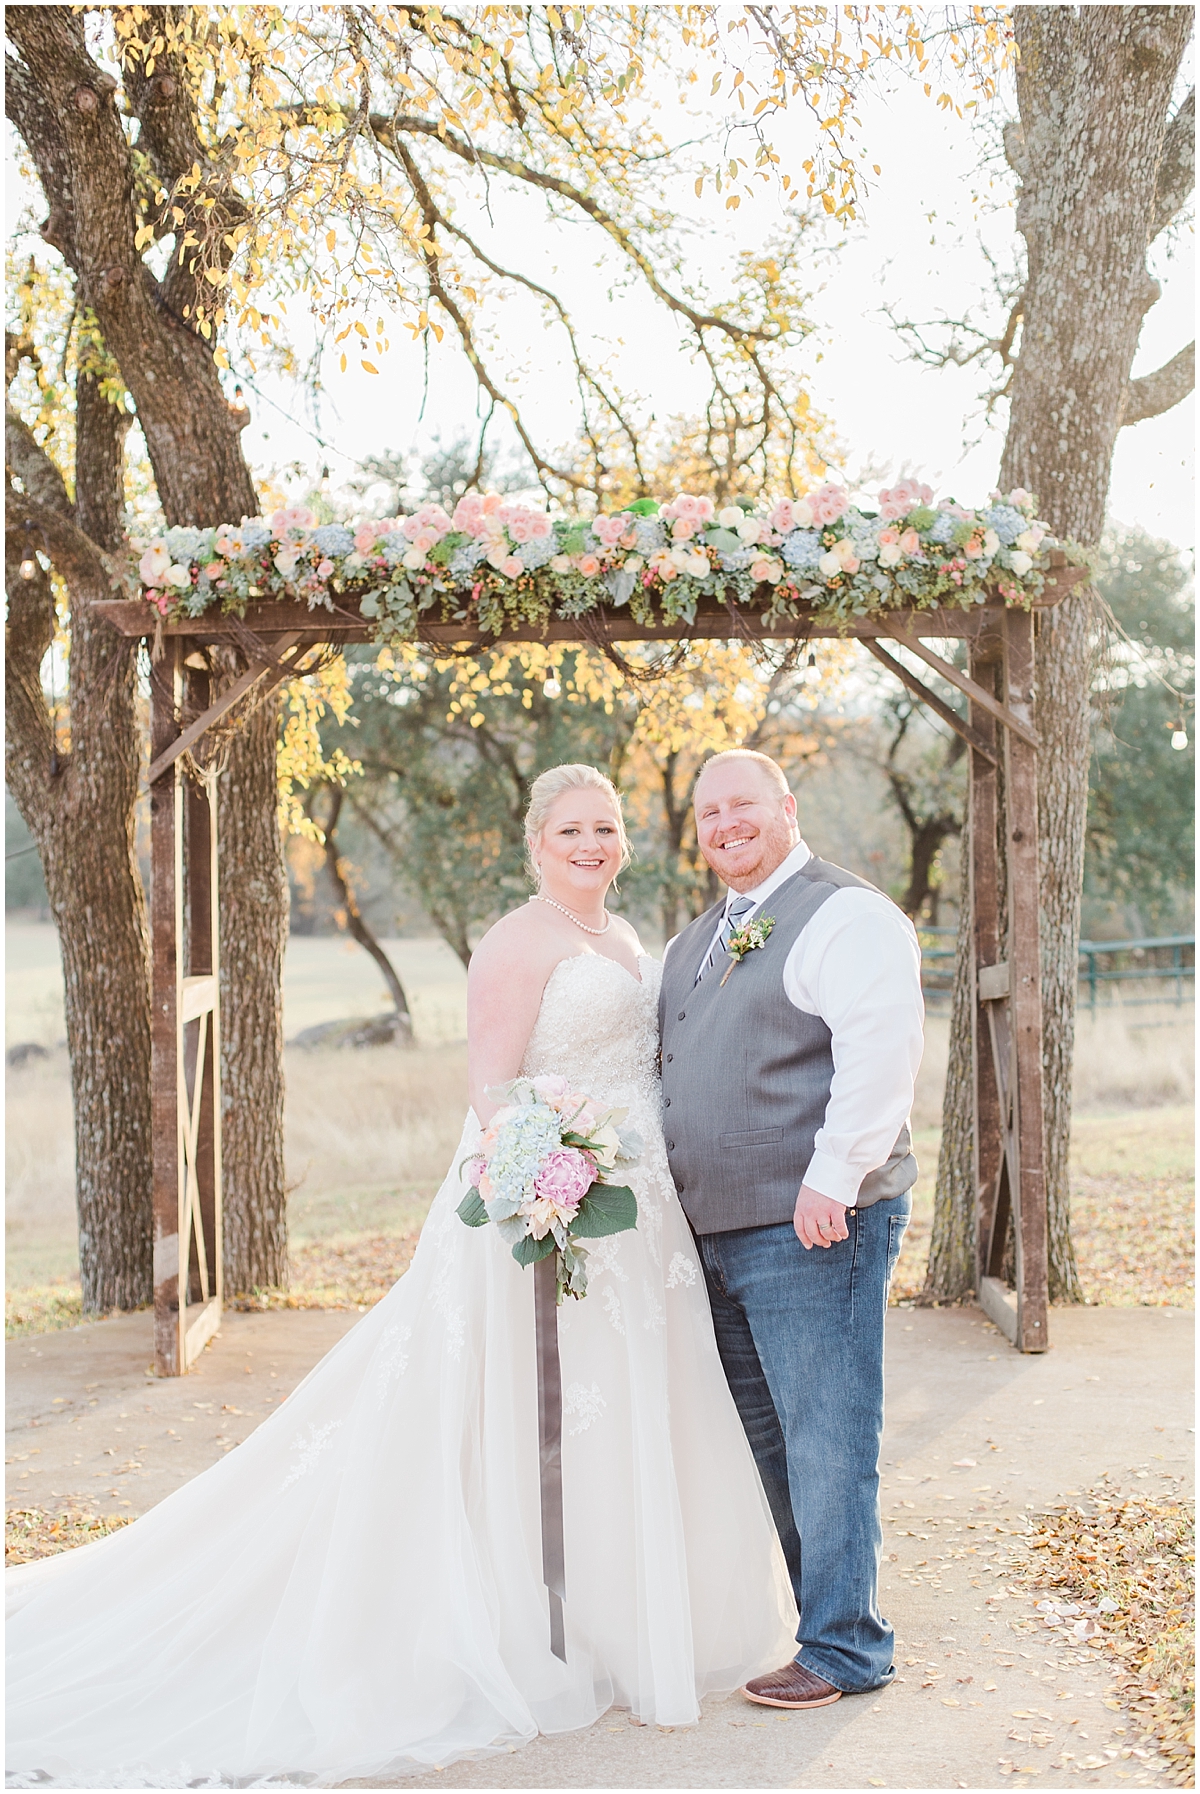 a-slate-blue-and-grey-winter-wedding-at-cw-hill-country-ranch-in-boerne-texas-by-allison-jeffers-wedding-photography_0078